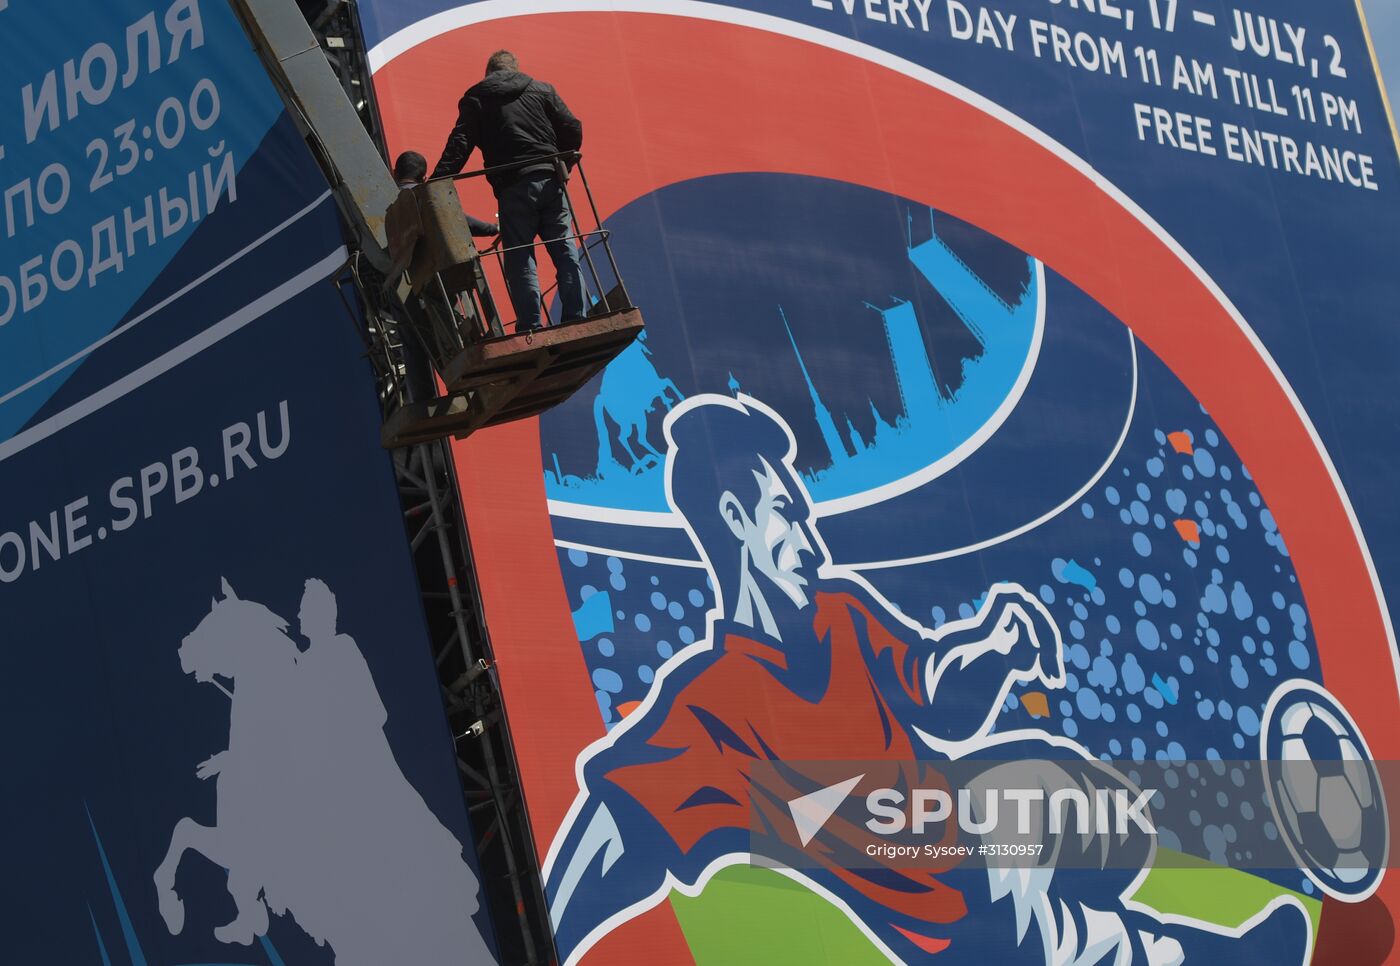 Preparations for 2017 Confederations Cup in Saint Petersburg